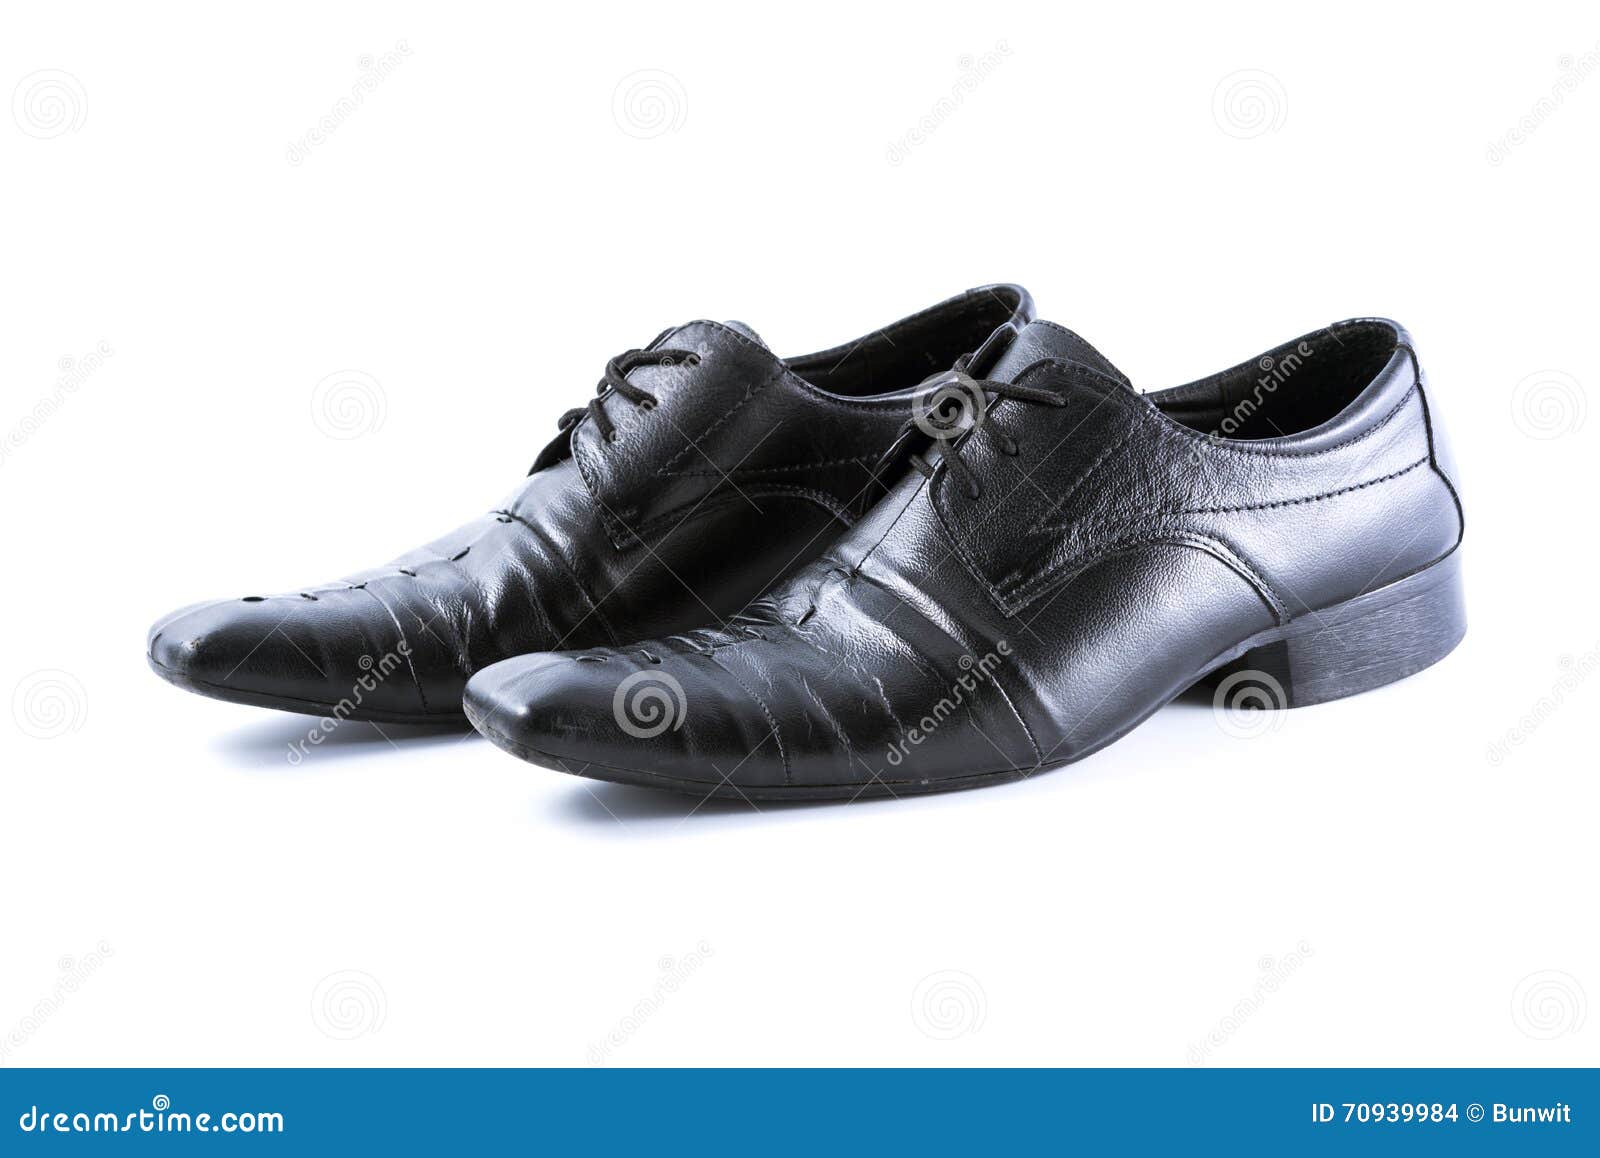 Used Men Shoes on White Background Stock Photo - Image of dirty, shoes ...